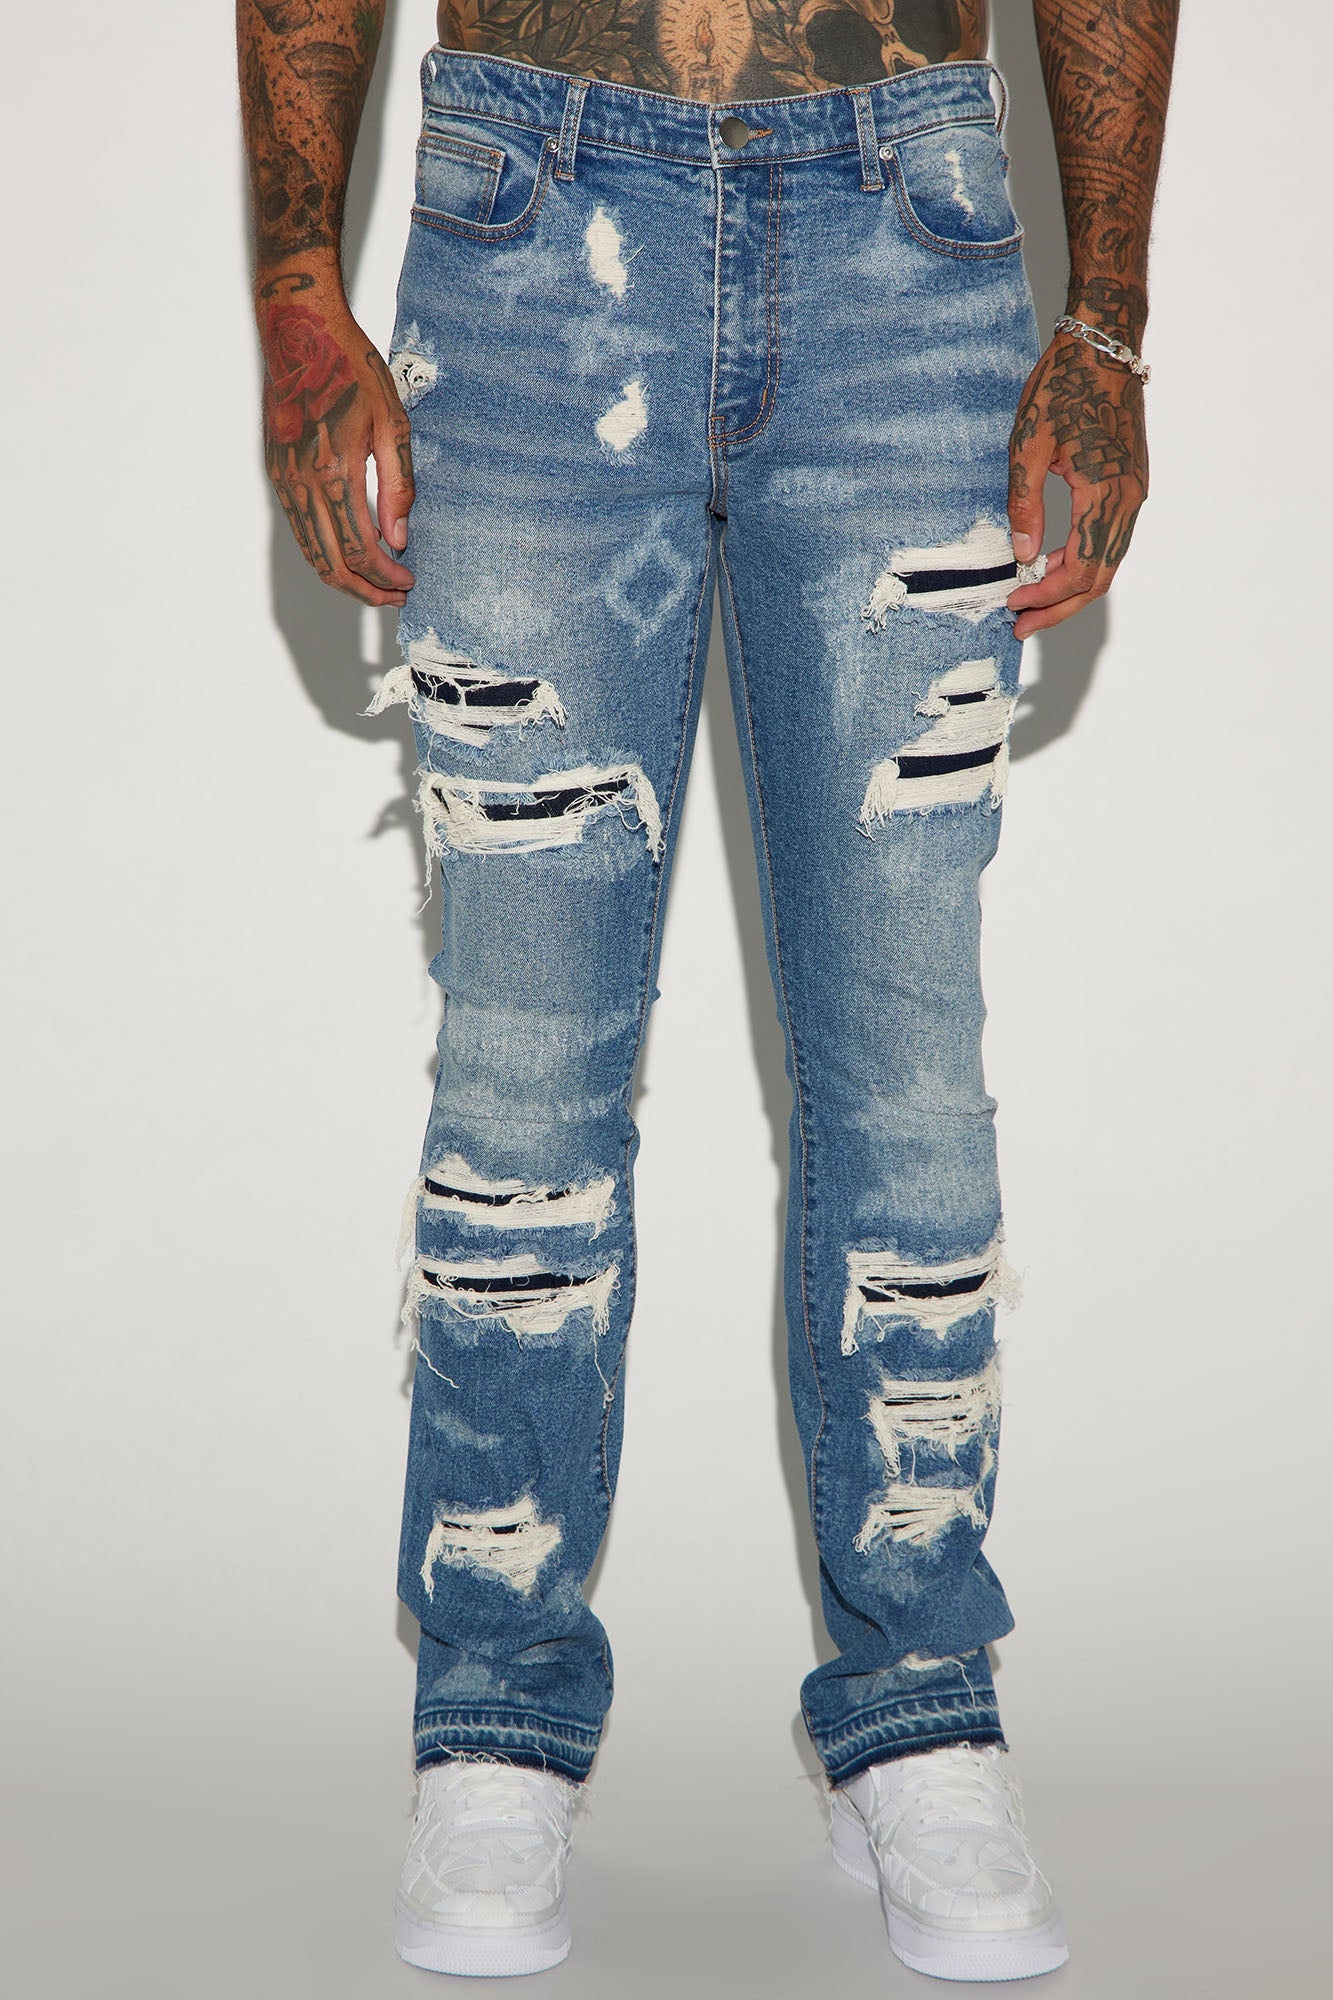 Get Cuffed in Style: Medium Wash Stacked Skinny Flared Jeans